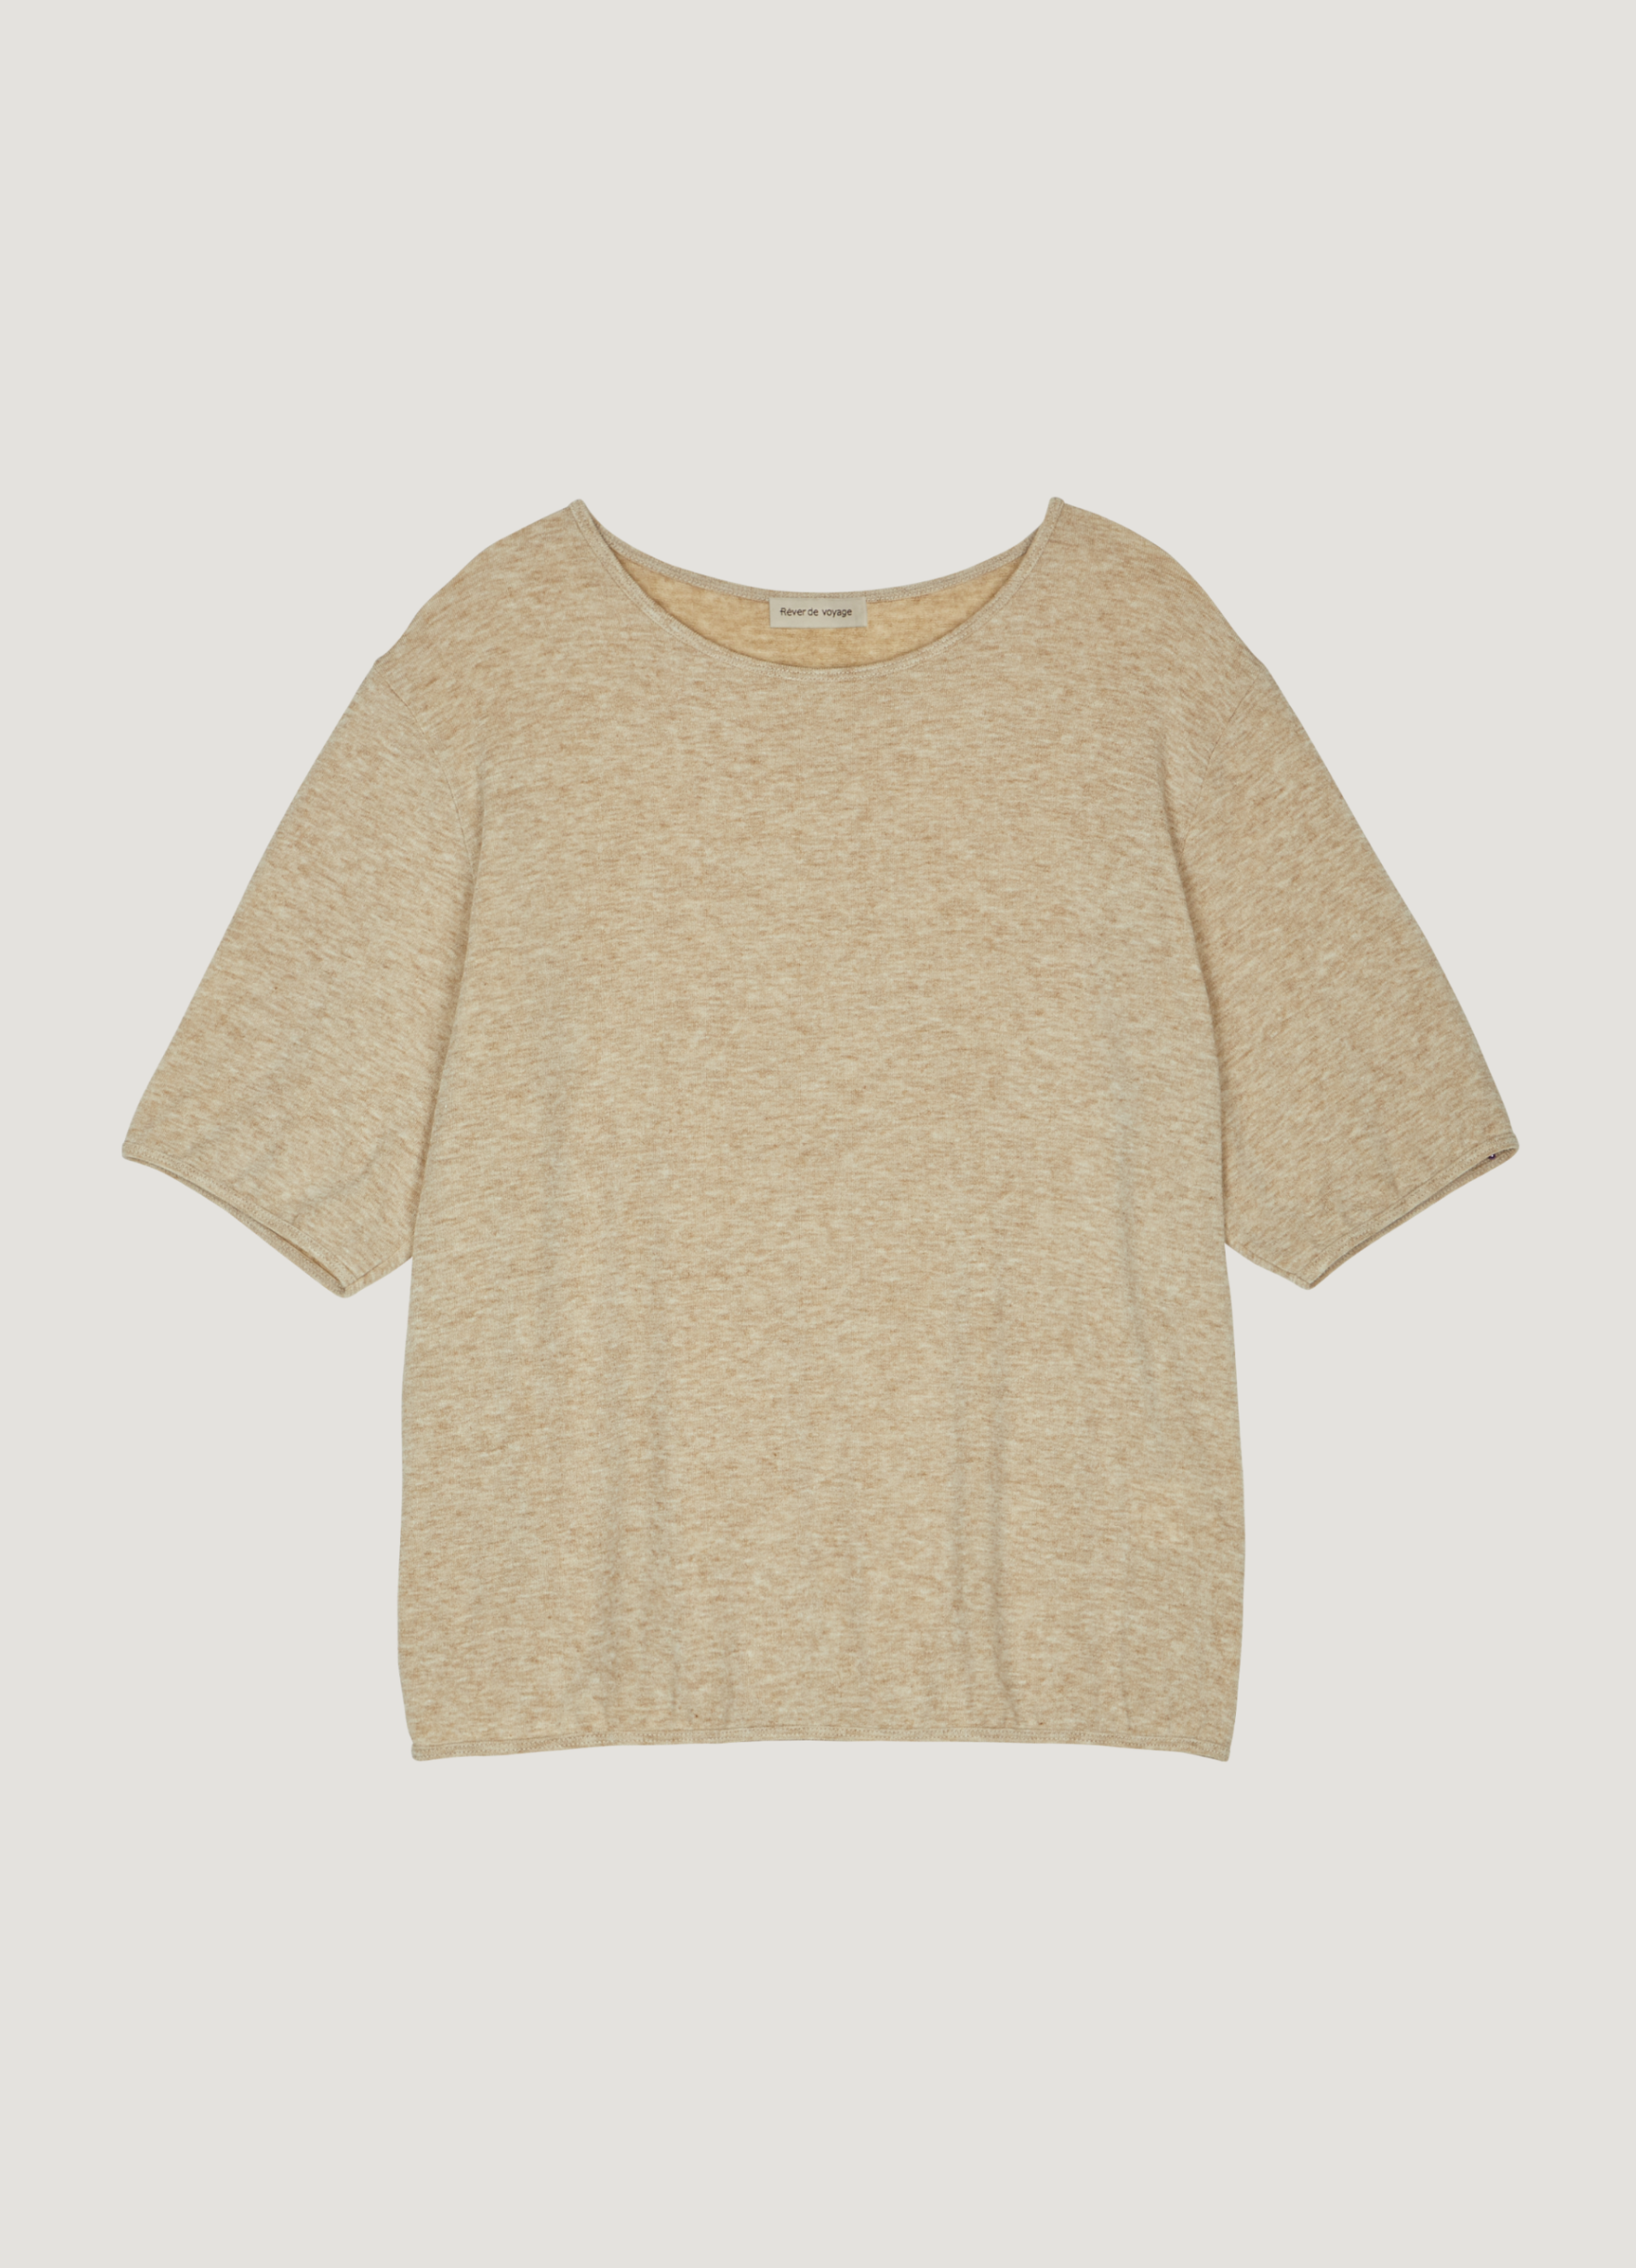 Bulky Wool Span T-shirt (Oatmeal Beige) Out Of Stock